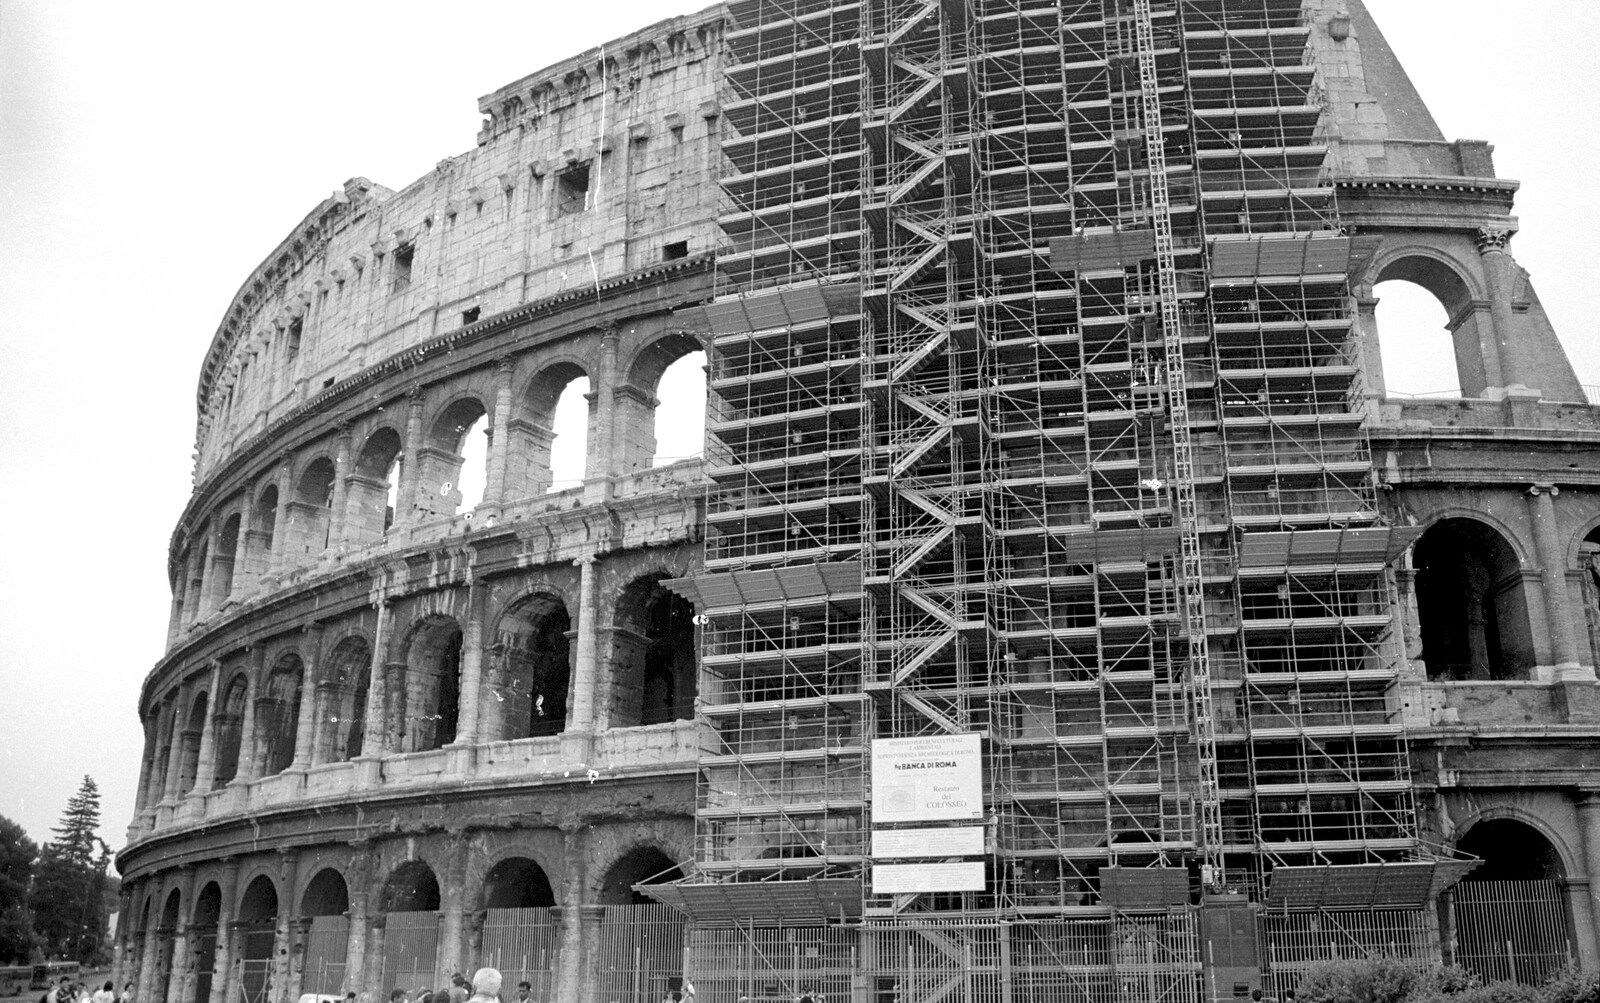 The Colosseum is covered in scaffolding from A Working Trip to Rome, Italy - 10th September 1999